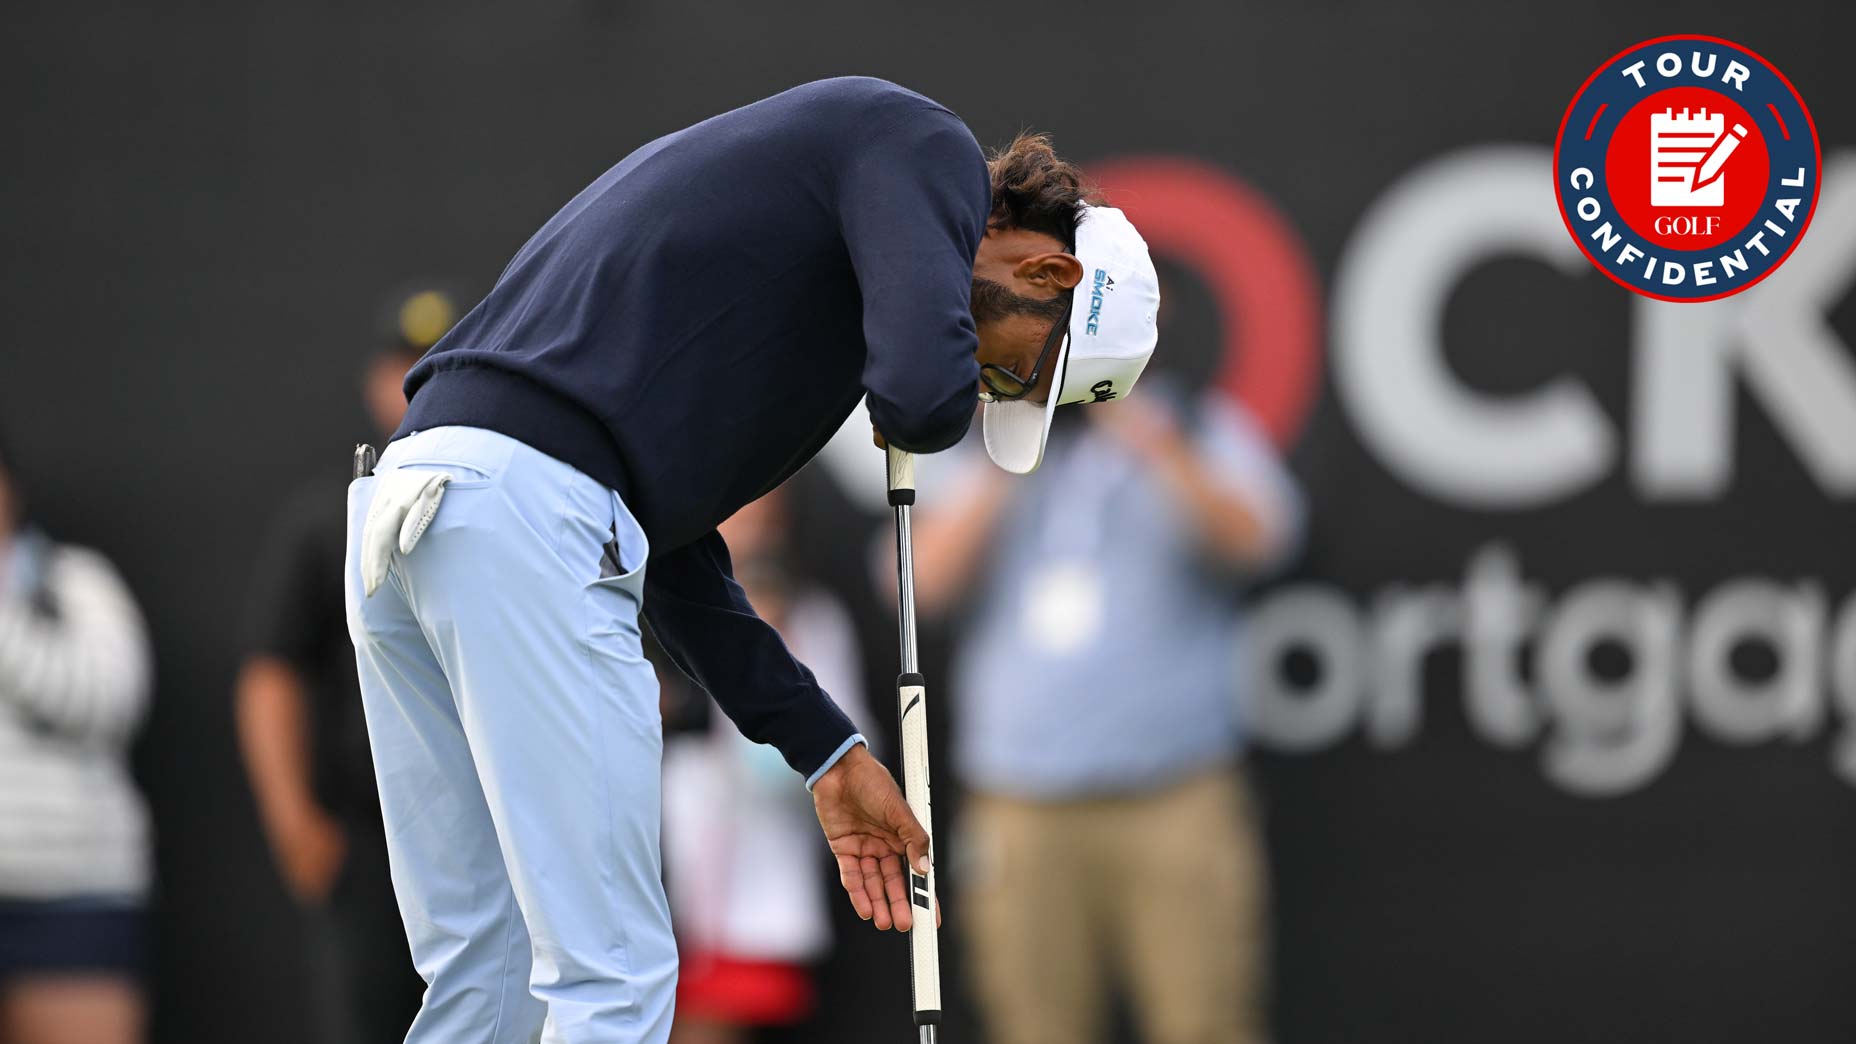 Akshay Bhatia reacts to his missed putt at the Rocket Mortgage Classic.